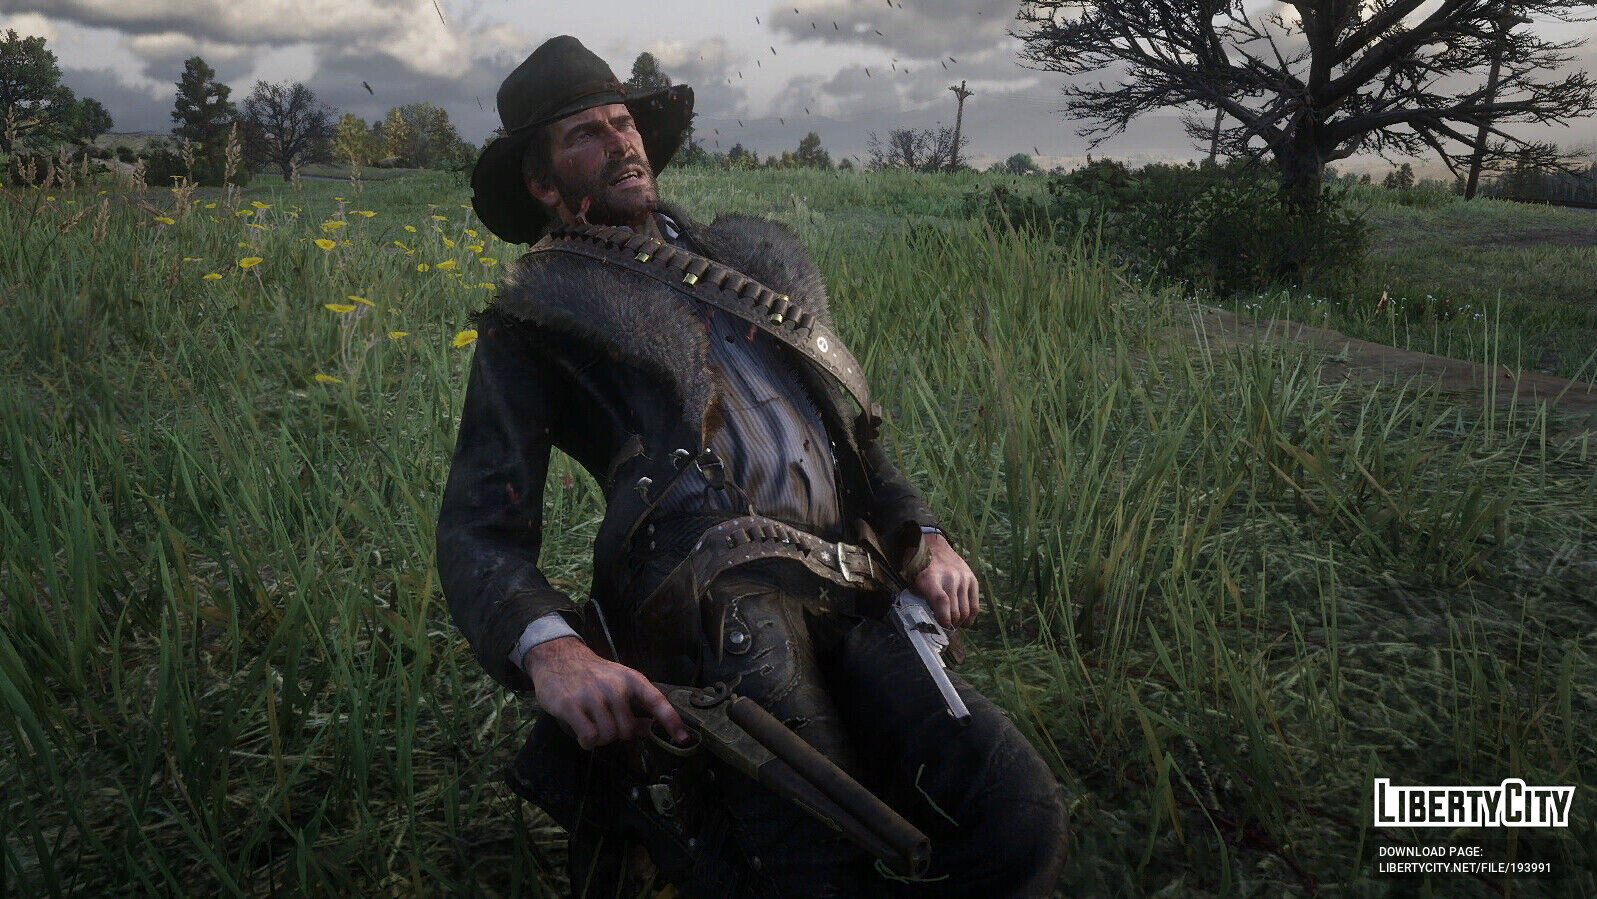 Red dead redemption 2 scripts. Red Dead Redemption 2. Red Dead Redemption 2 Fashion. Red Dead Redemption. Redemption 2.